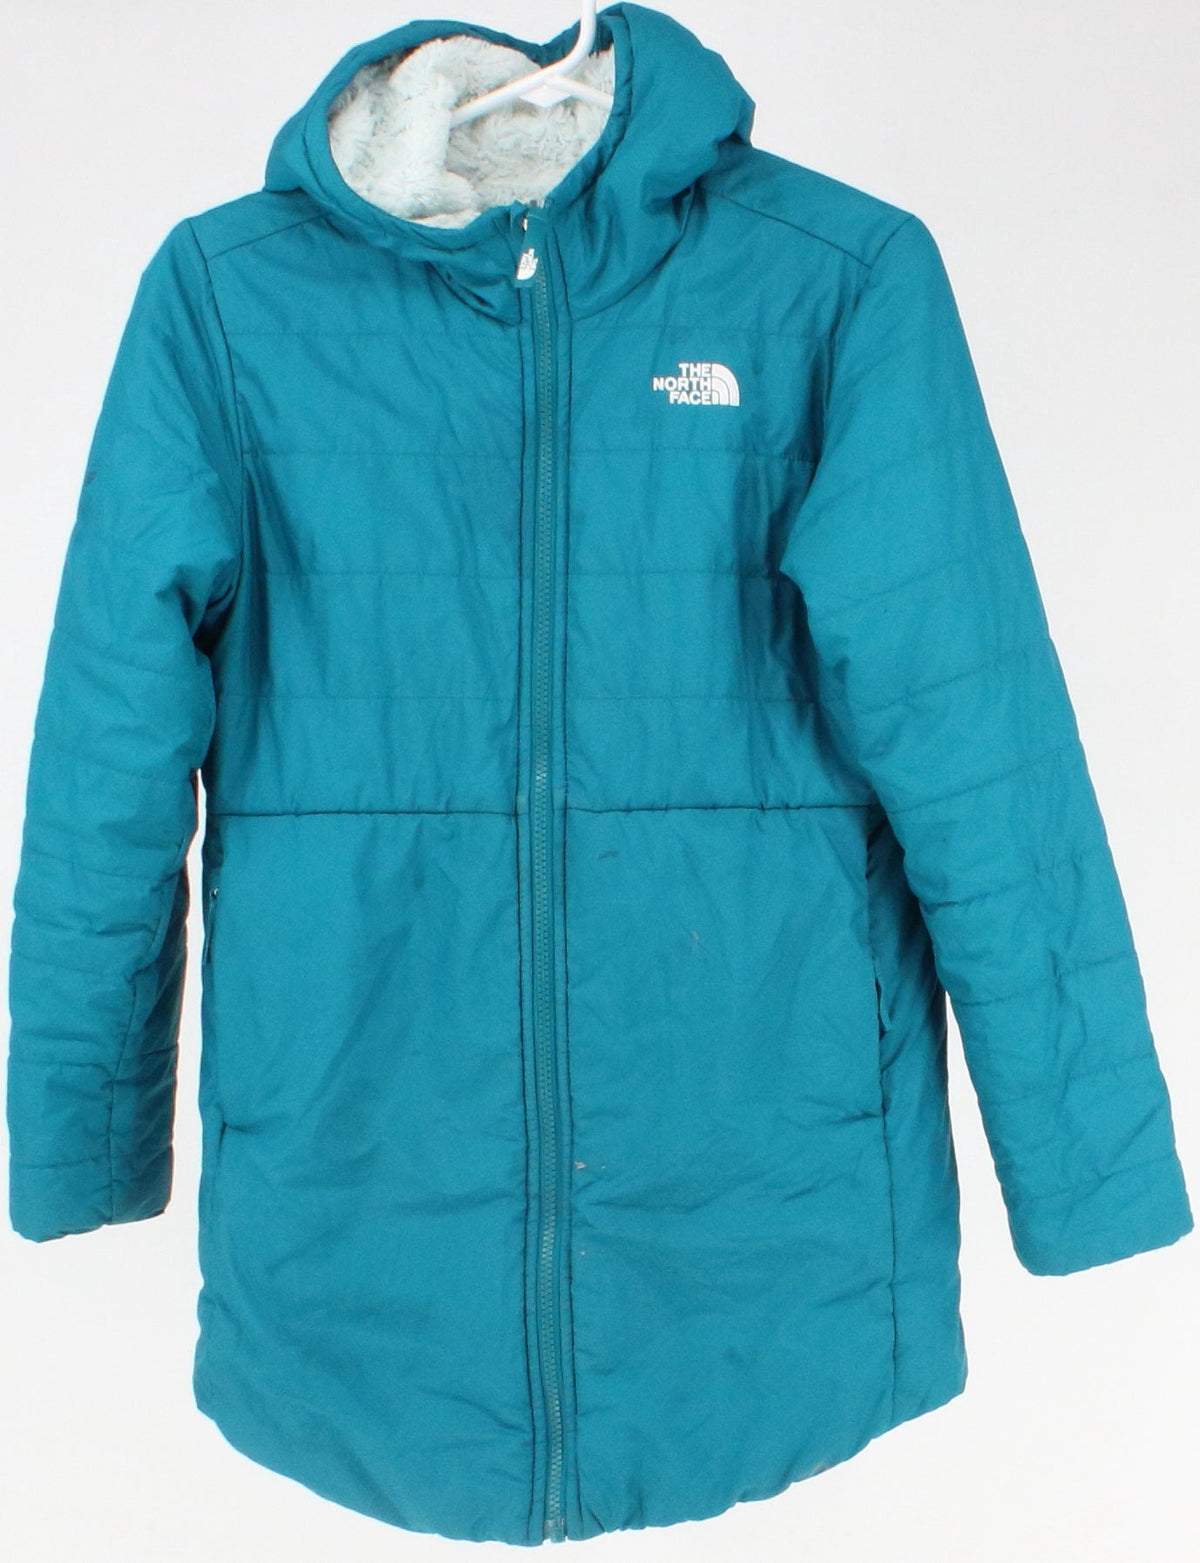 The North Face Teal Girl's Puffer Jacket With Soft Teddy Lining